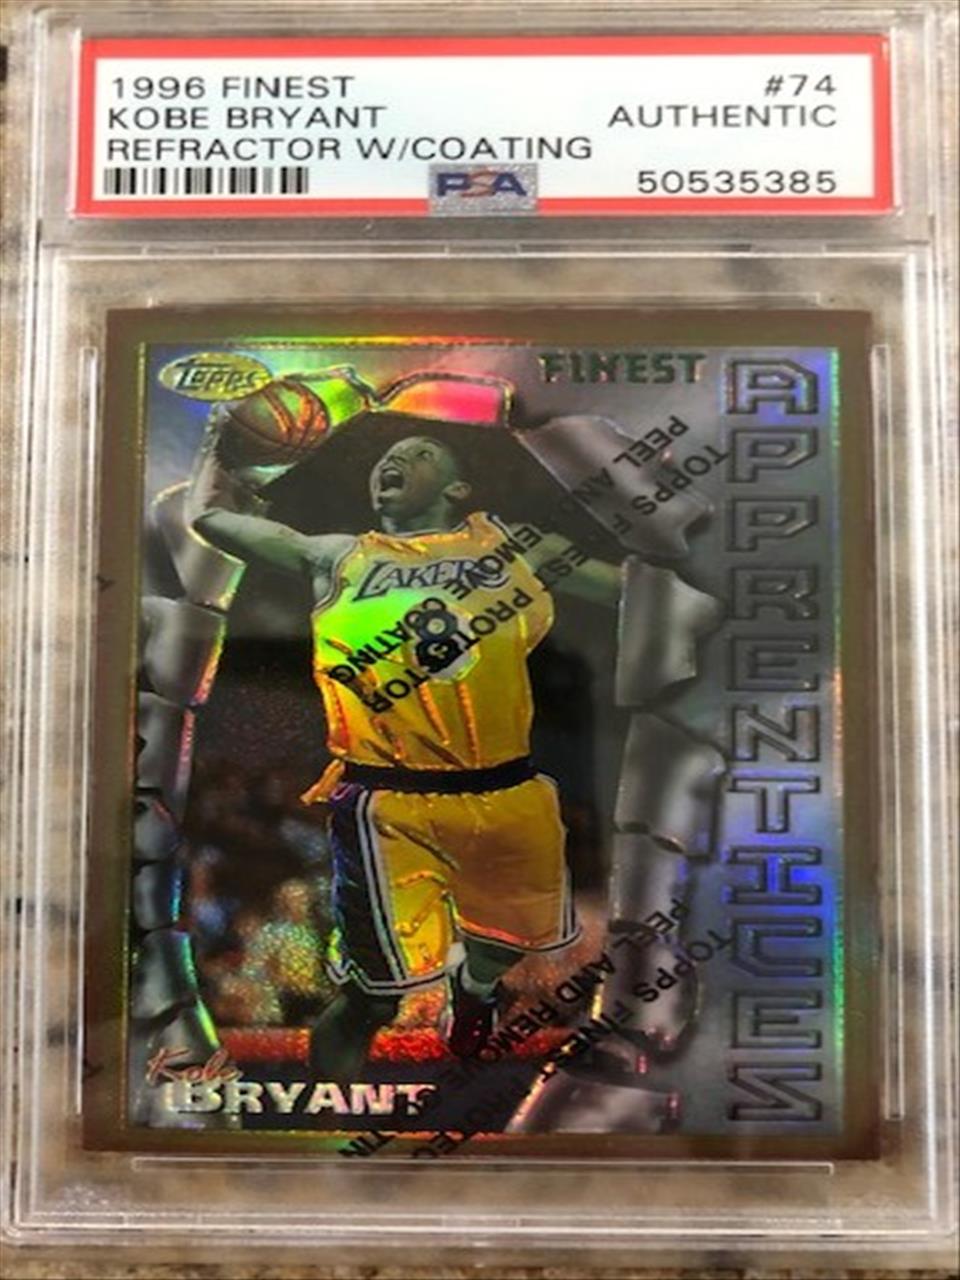 Sold at Auction: 1996 Topps Kobe Bryant Rookie Card